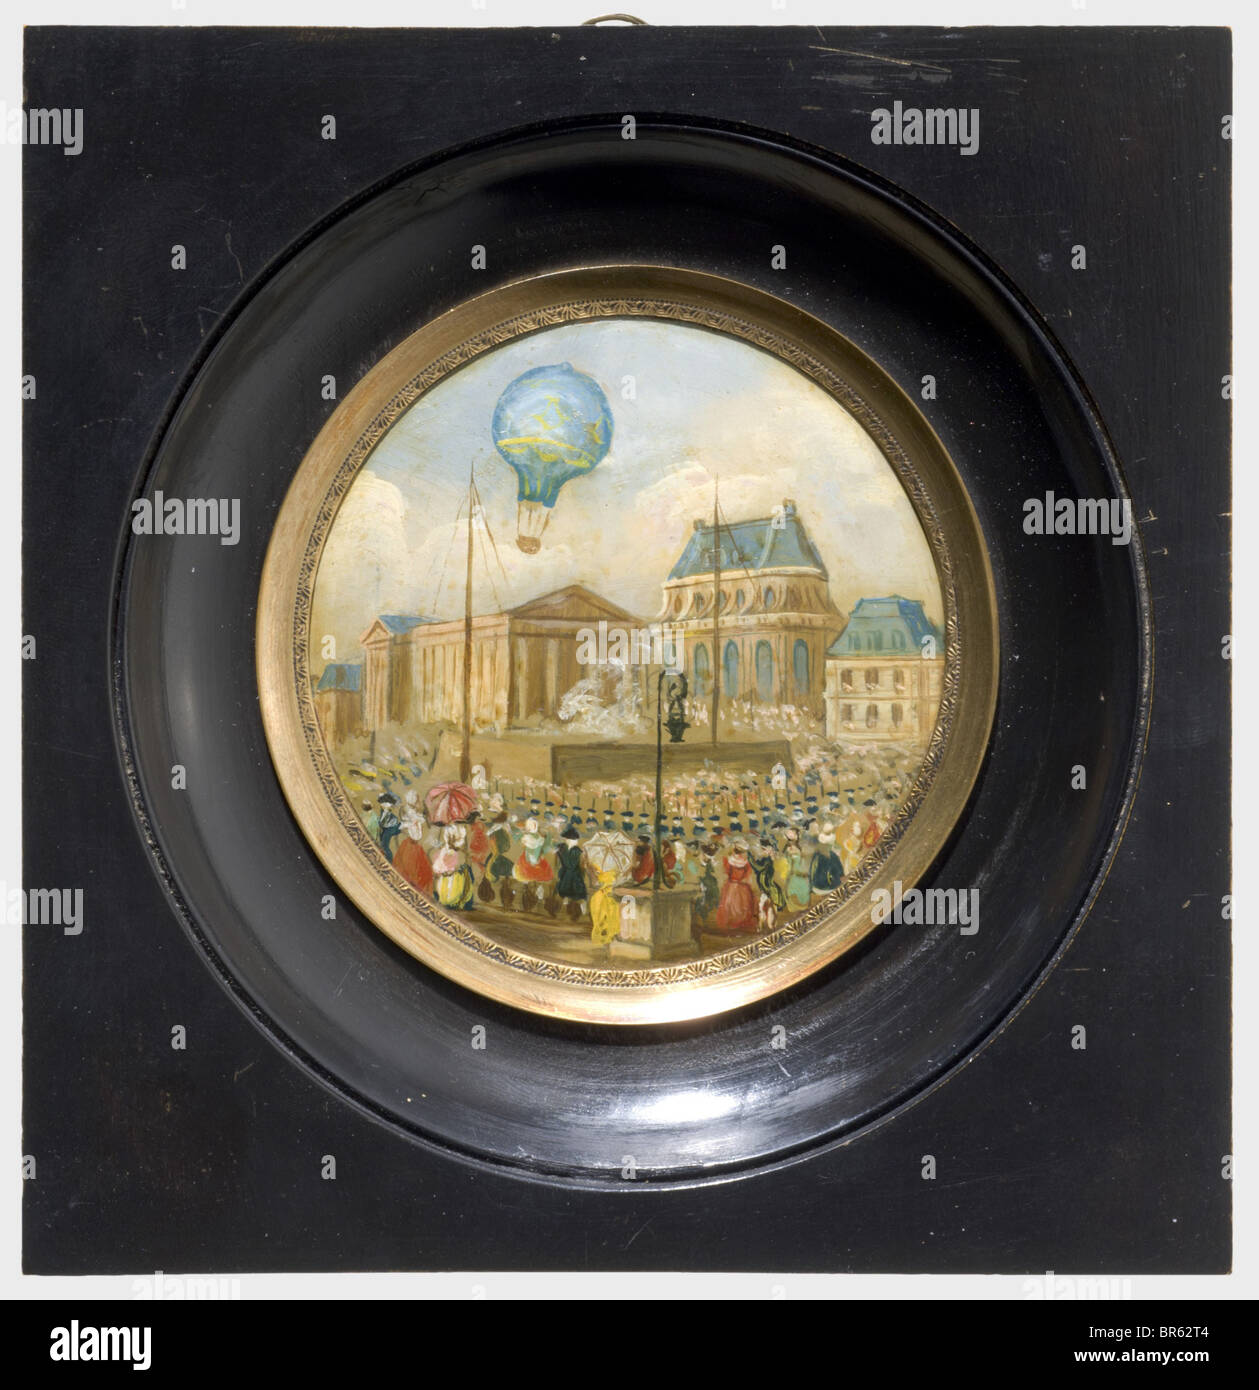 The first manned ballooning on 21. November 1783 - a miniature painting, oil on copper, France, 1st half of the 19th century. Unsigned. Detailed painted scene. The balloon of the physicist Jean-Fran‡ois Pilâtre de Rozier and of the guard-officer Fran‡ois d'Arlandes over the impressive Château de la Muette. In the courtyard of the castle wads of smoke can be seen from the fire necessary for the production of heated air. In the foreground spectators and a honour guard of soldiers. Diameter circa 7.5 cm. Mounted in brass and an ebonised wooden frame. The verso cov, Stock Photo